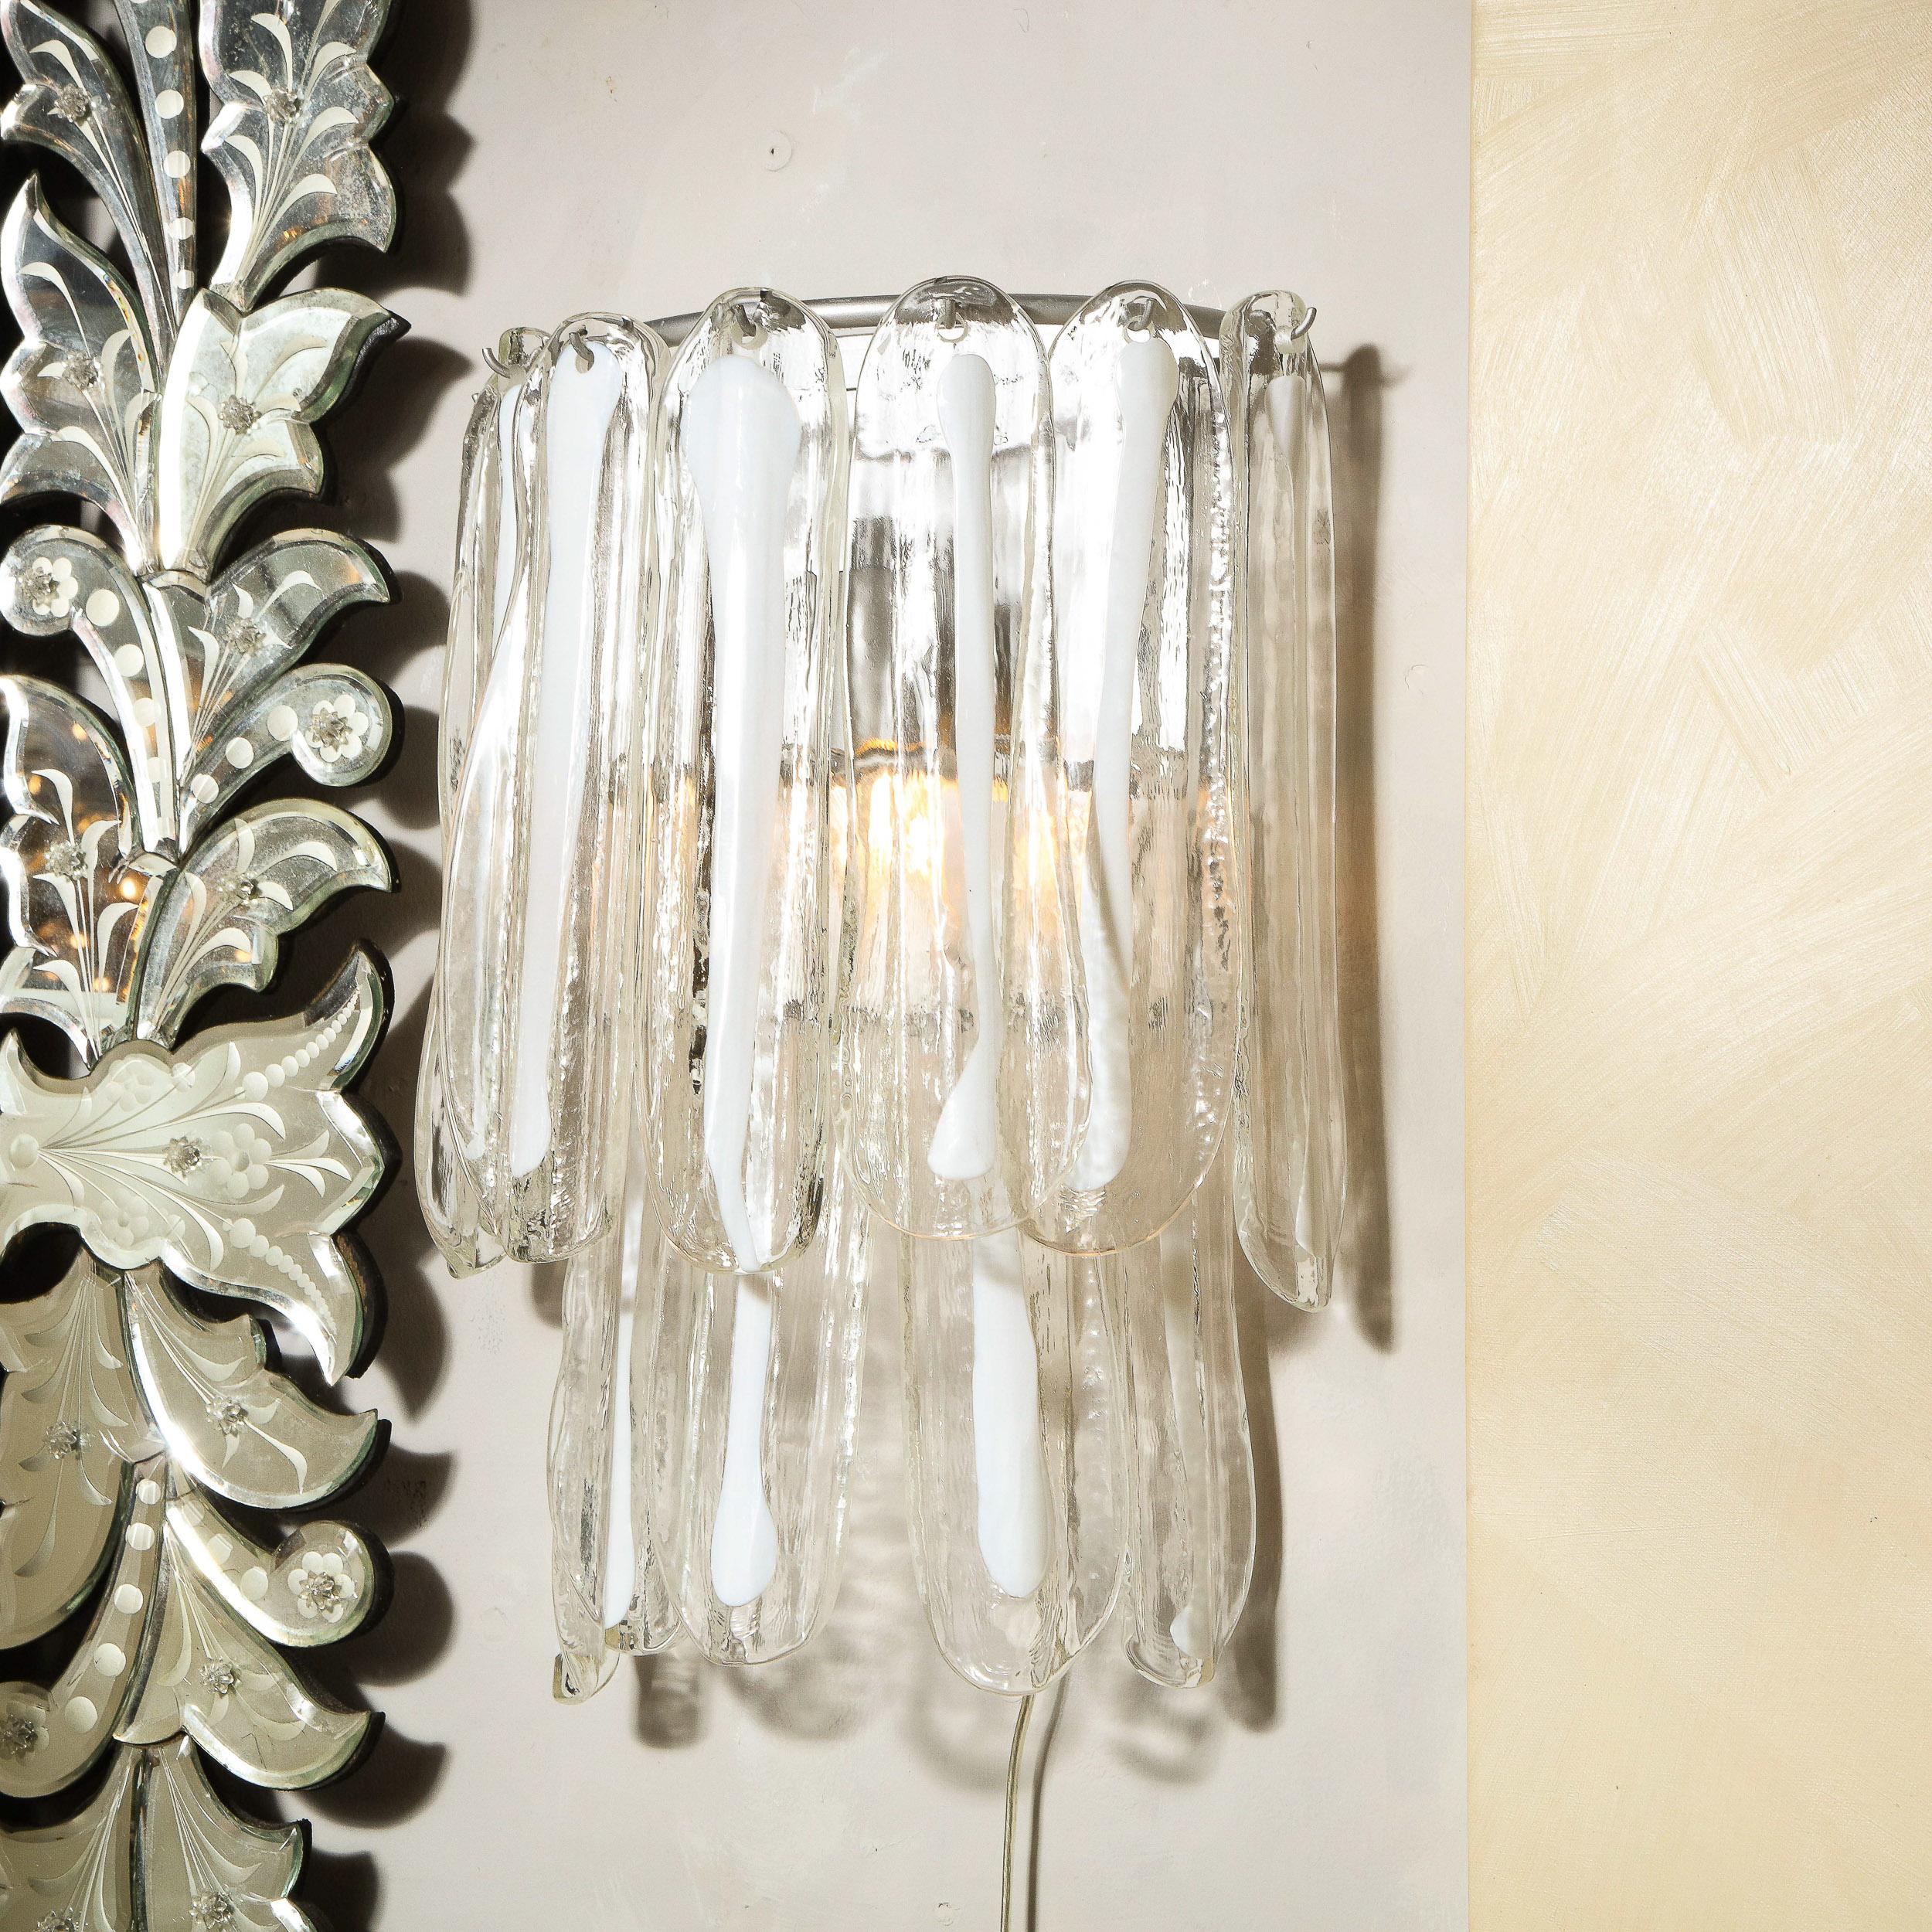 Pair of Mid-Century Modern Translucent & White Murano Glass Sconces by Mazzega For Sale 11